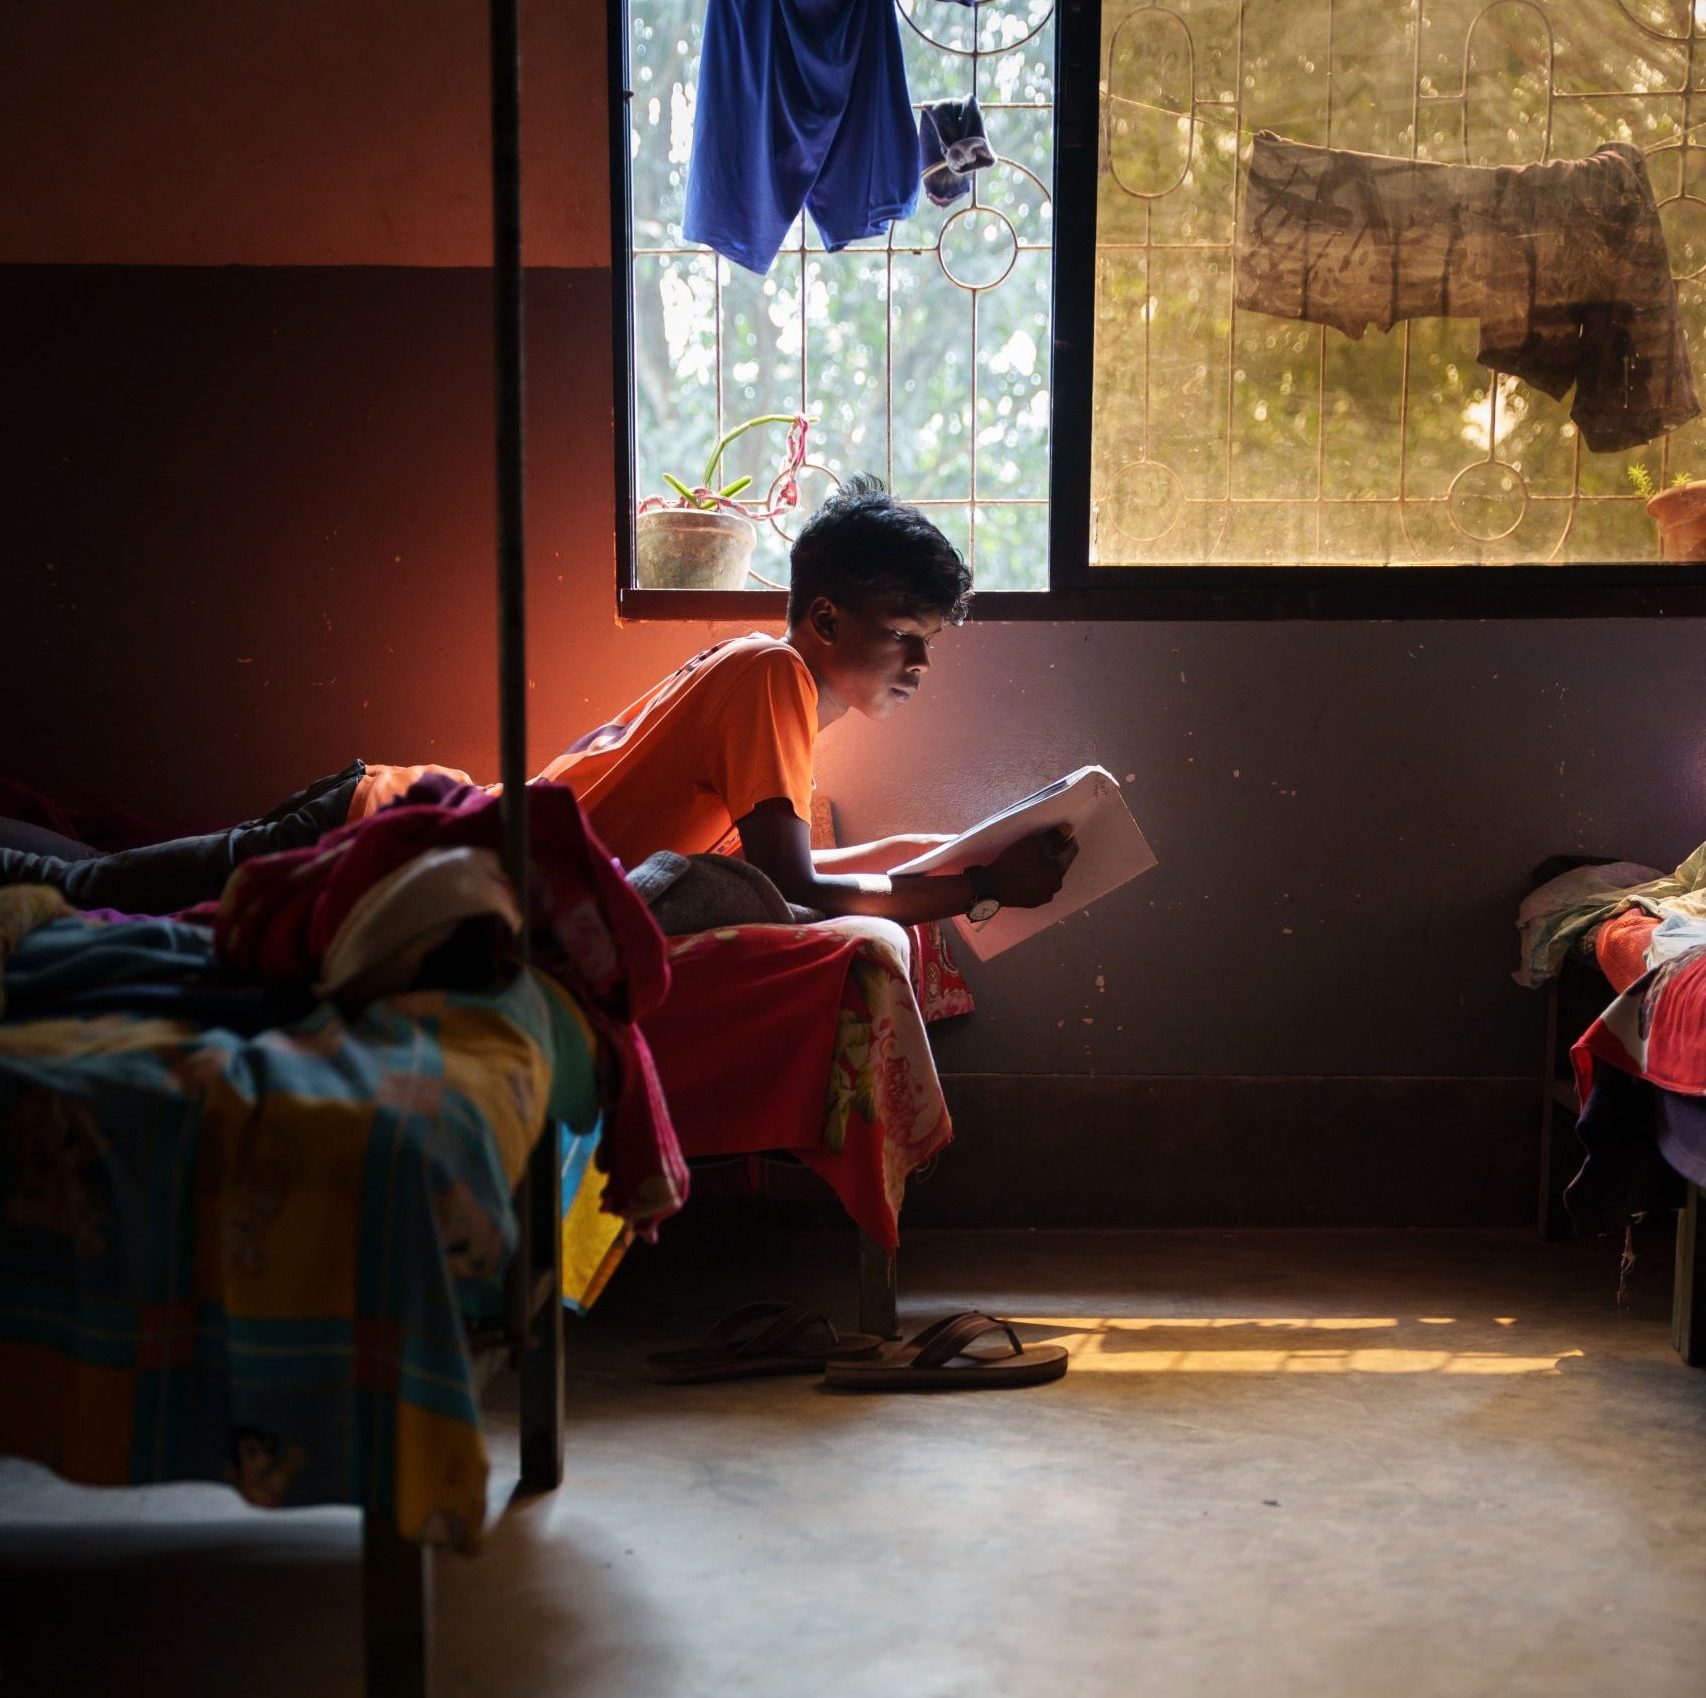 Hostels in Bangladesh, a home for students